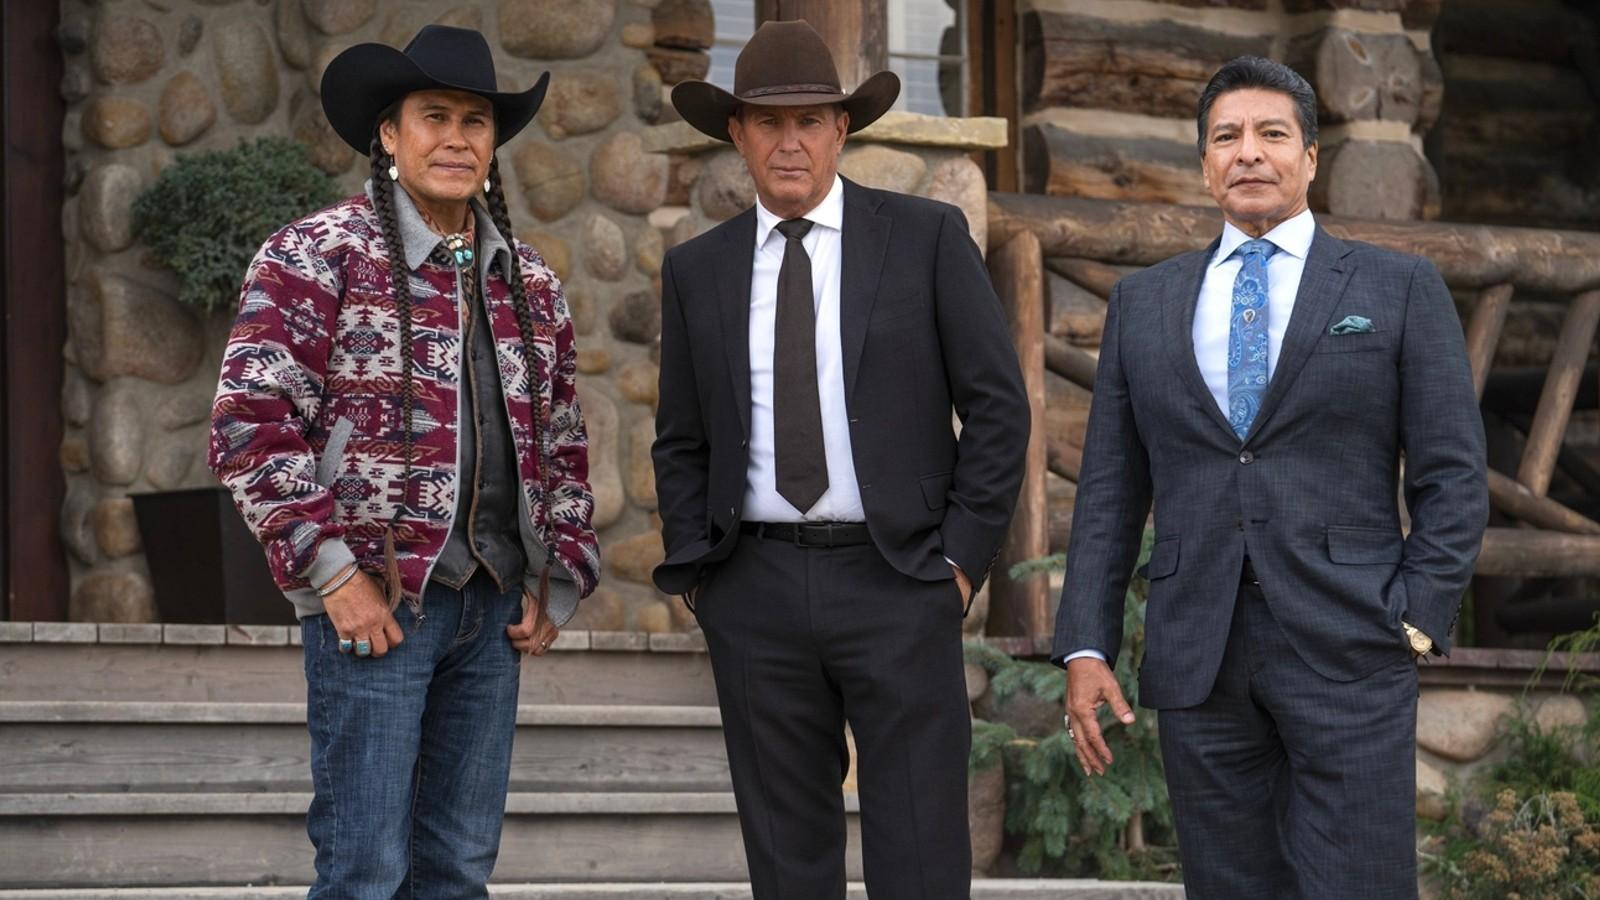 Mo Brings Plenty and the other cast members of Yellowstone